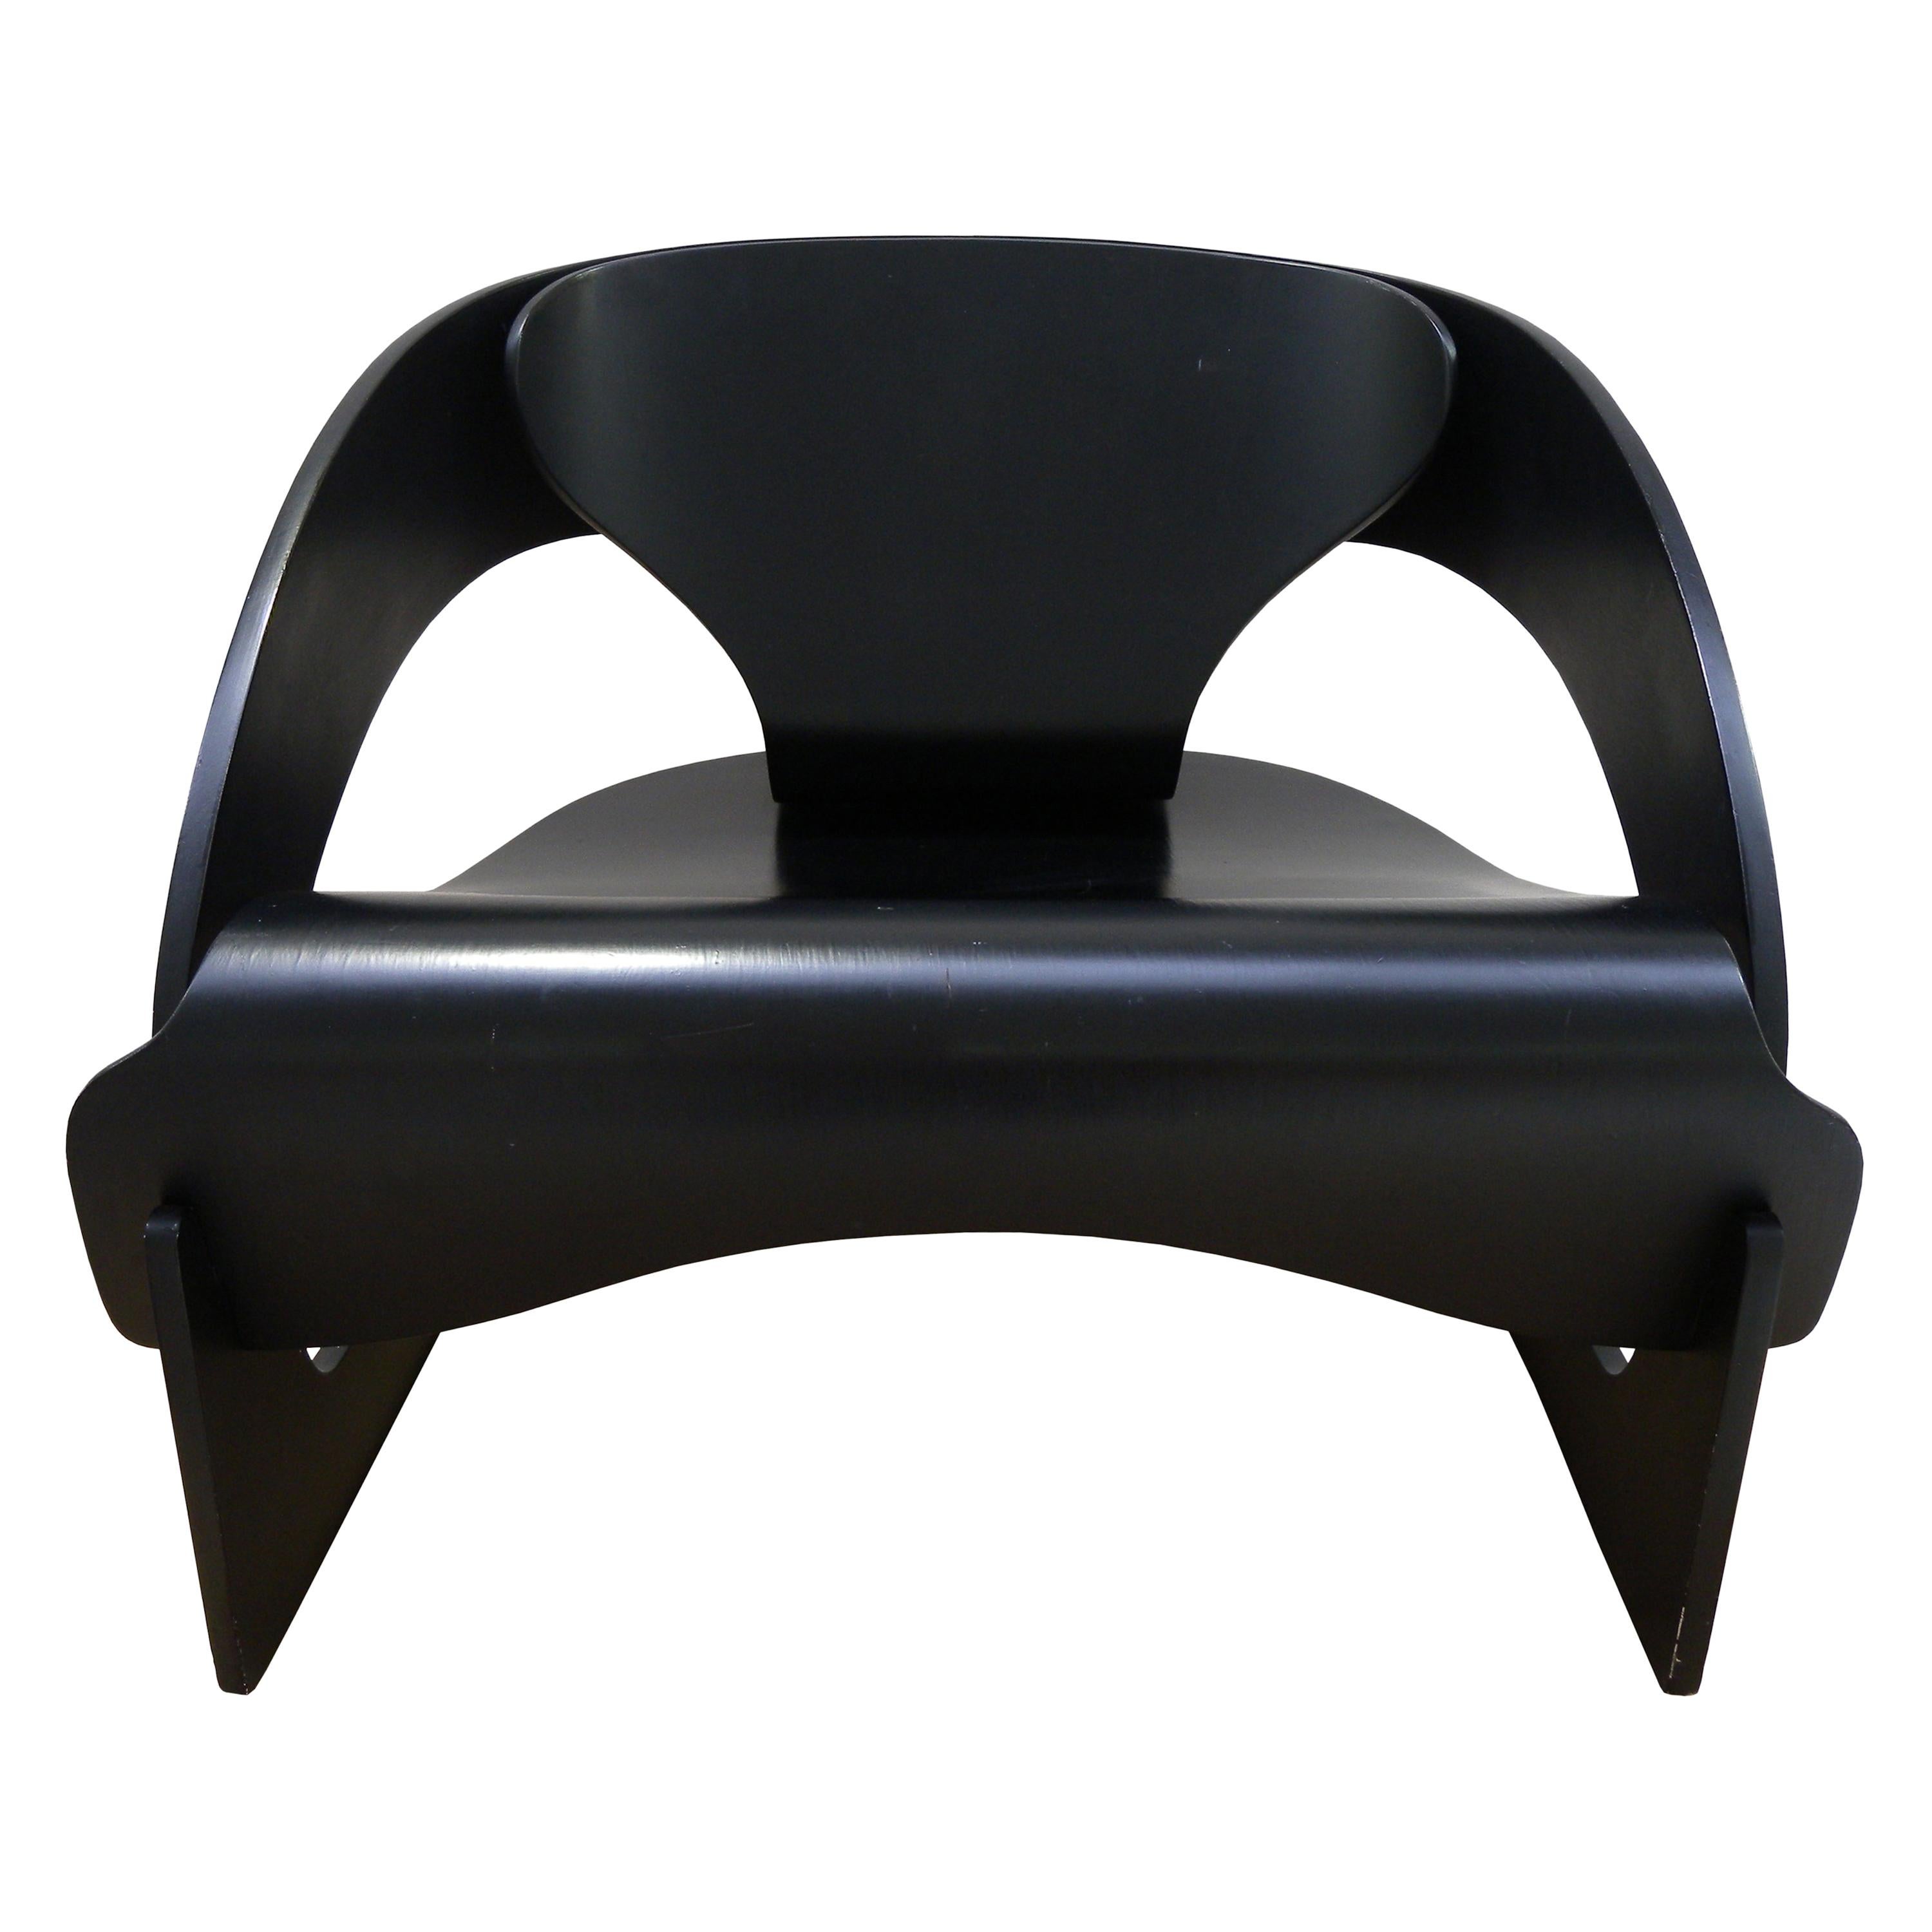 Joe Colombo Plywood Black 4801 Lounge Chair, Kartell, 1960s For Sale